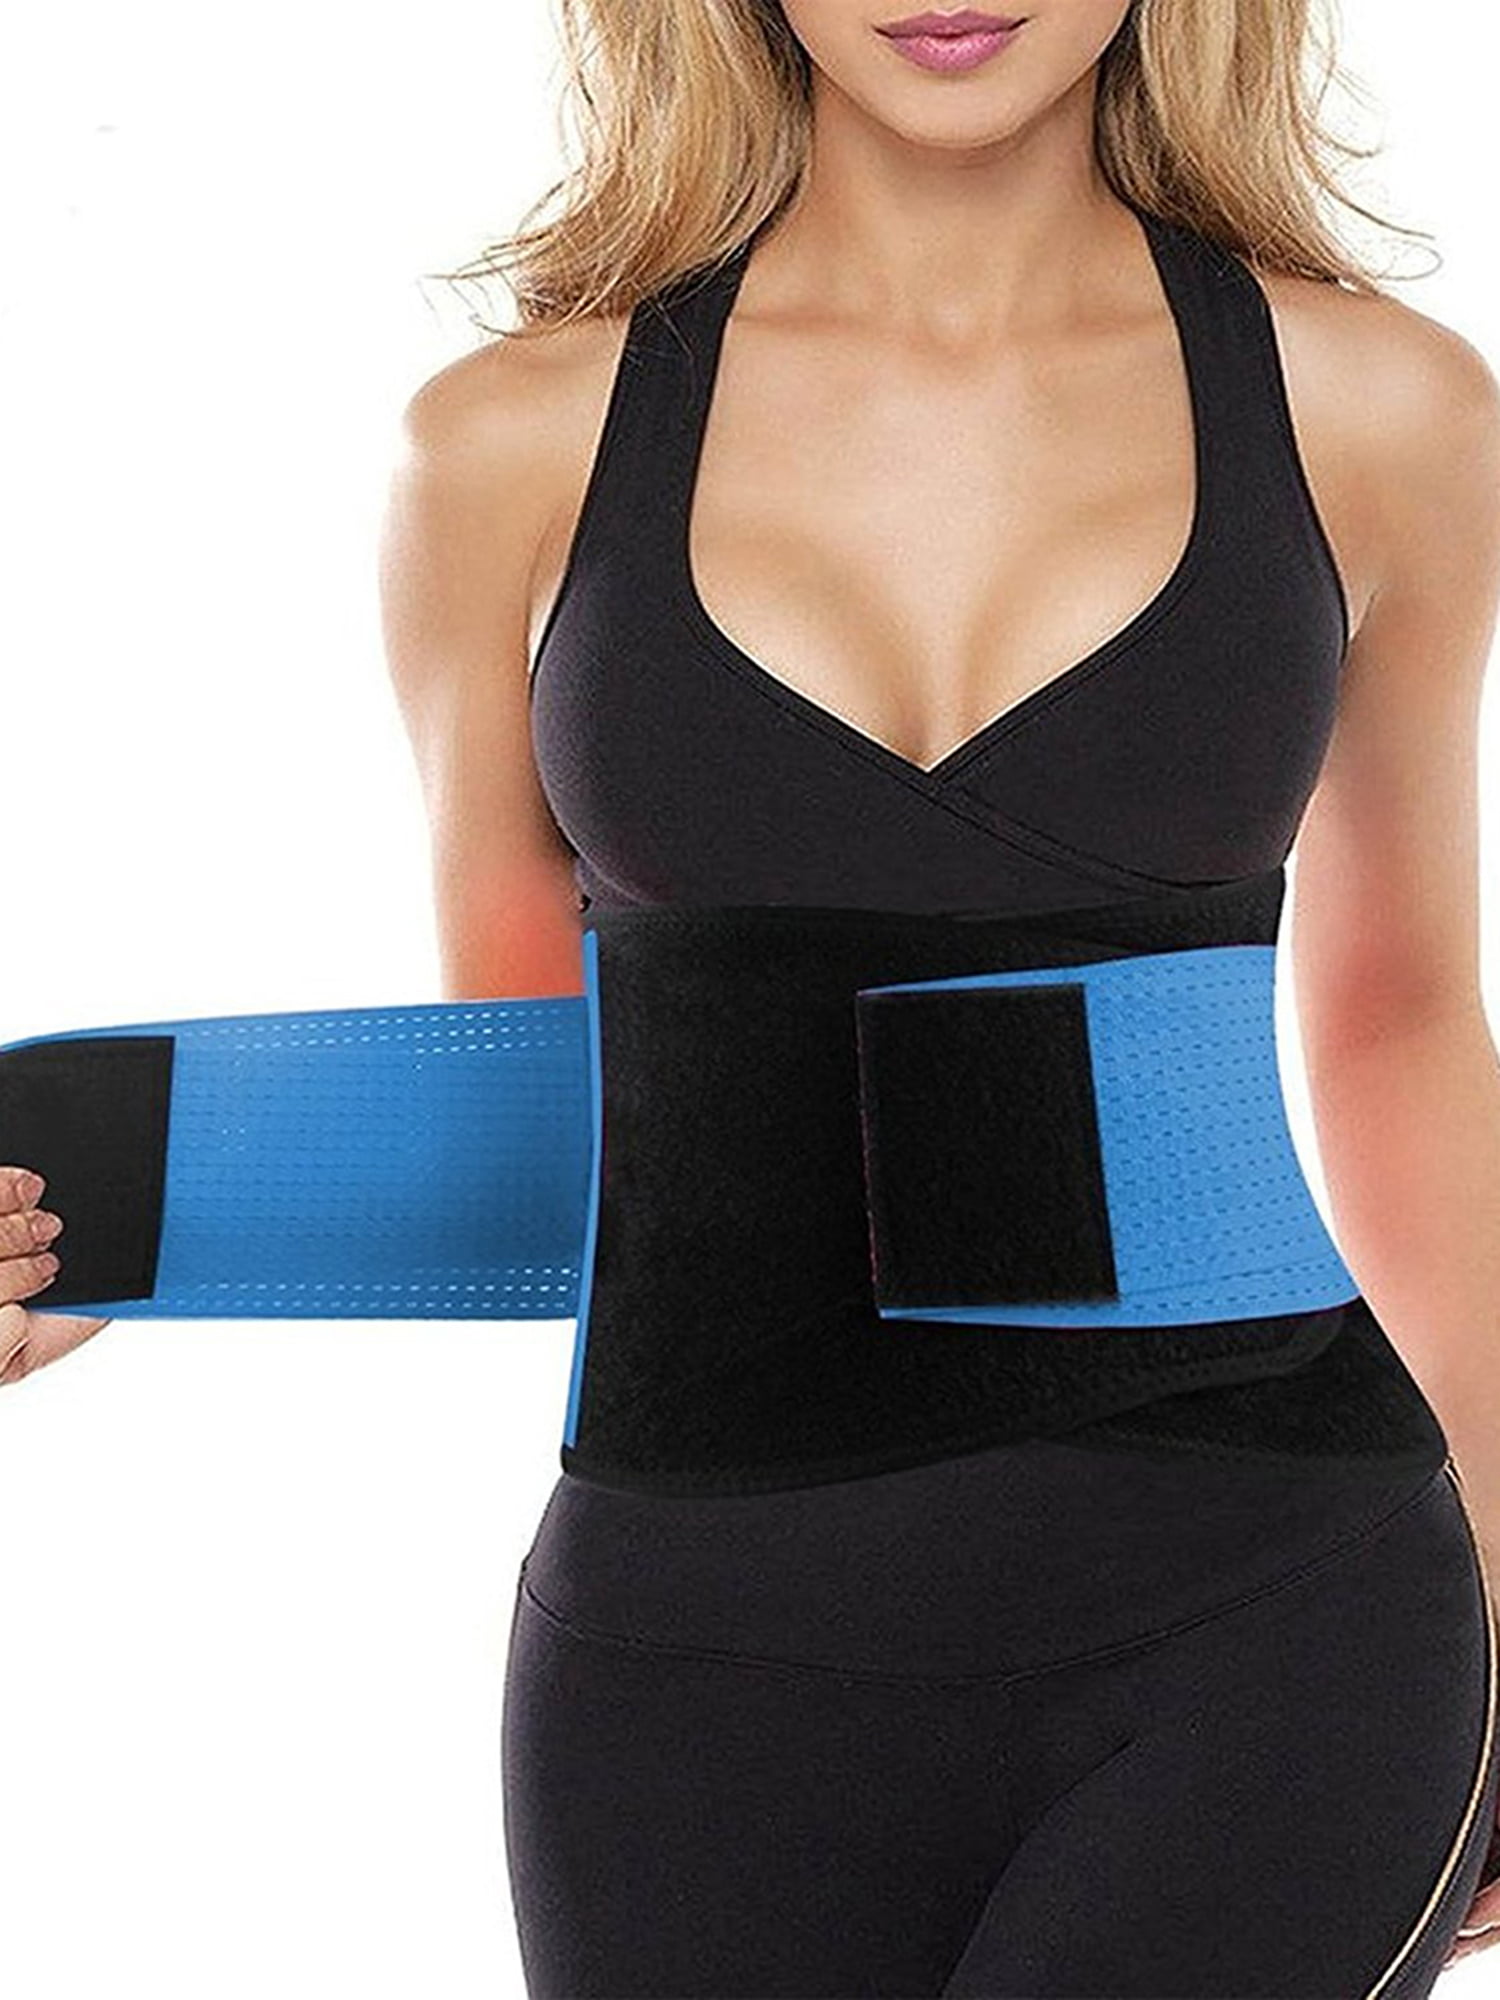 Abdomen Belt Tummy Control Shapewear WNGO Breathable Waist Cincher Slim Bodysuit Weight Loss Shaper Fixed Support Band Breathable Elastic for Summer Fitness Workout Sport Gym 